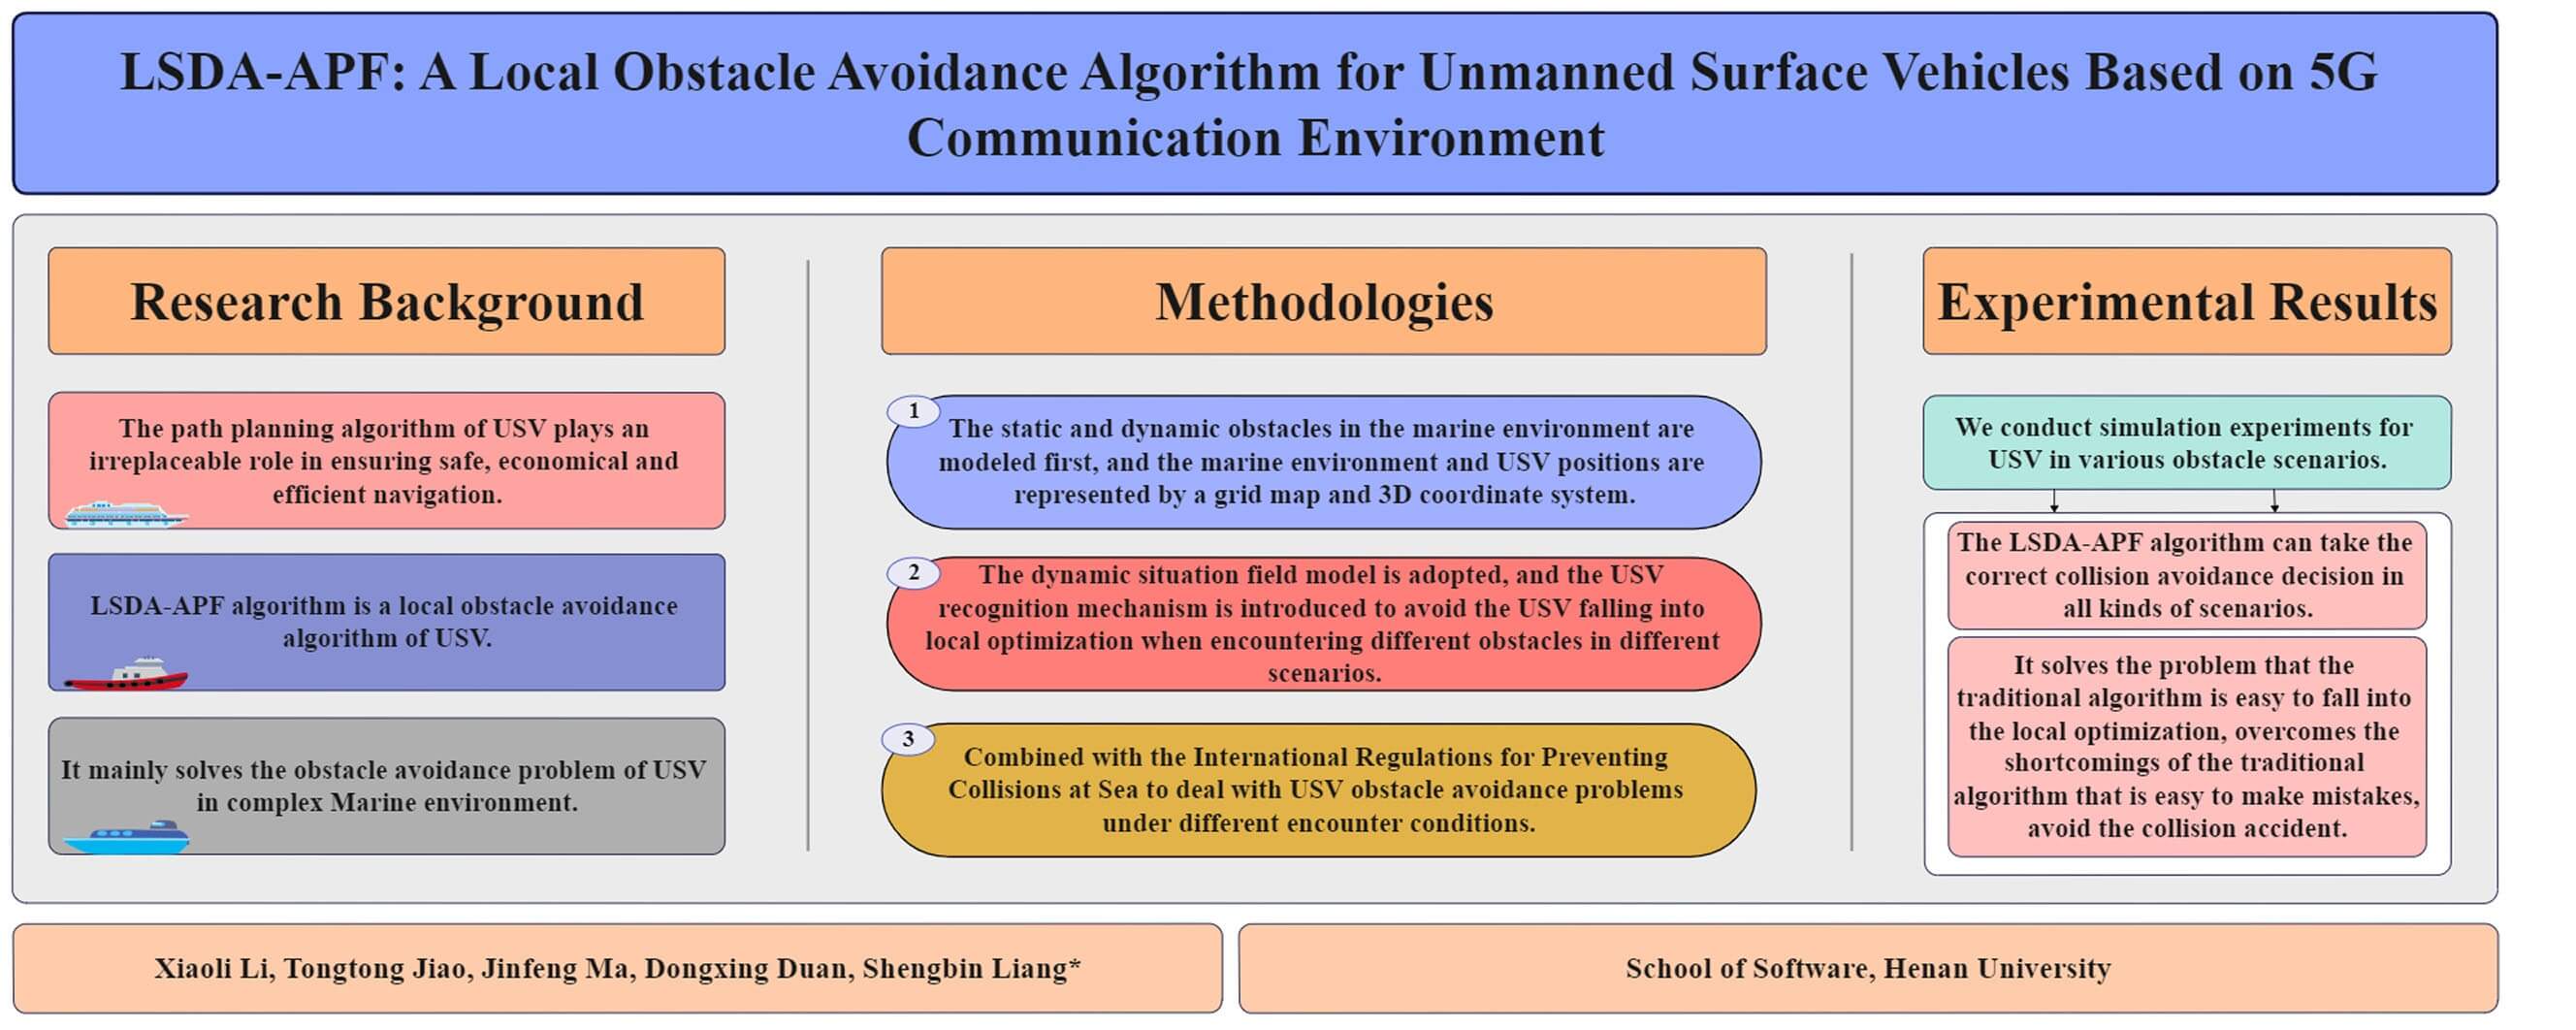 LSDA-APF: A Local Obstacle Avoidance Algorithm for Unmanned Surface Vehicles Based on 5G Communication Environment